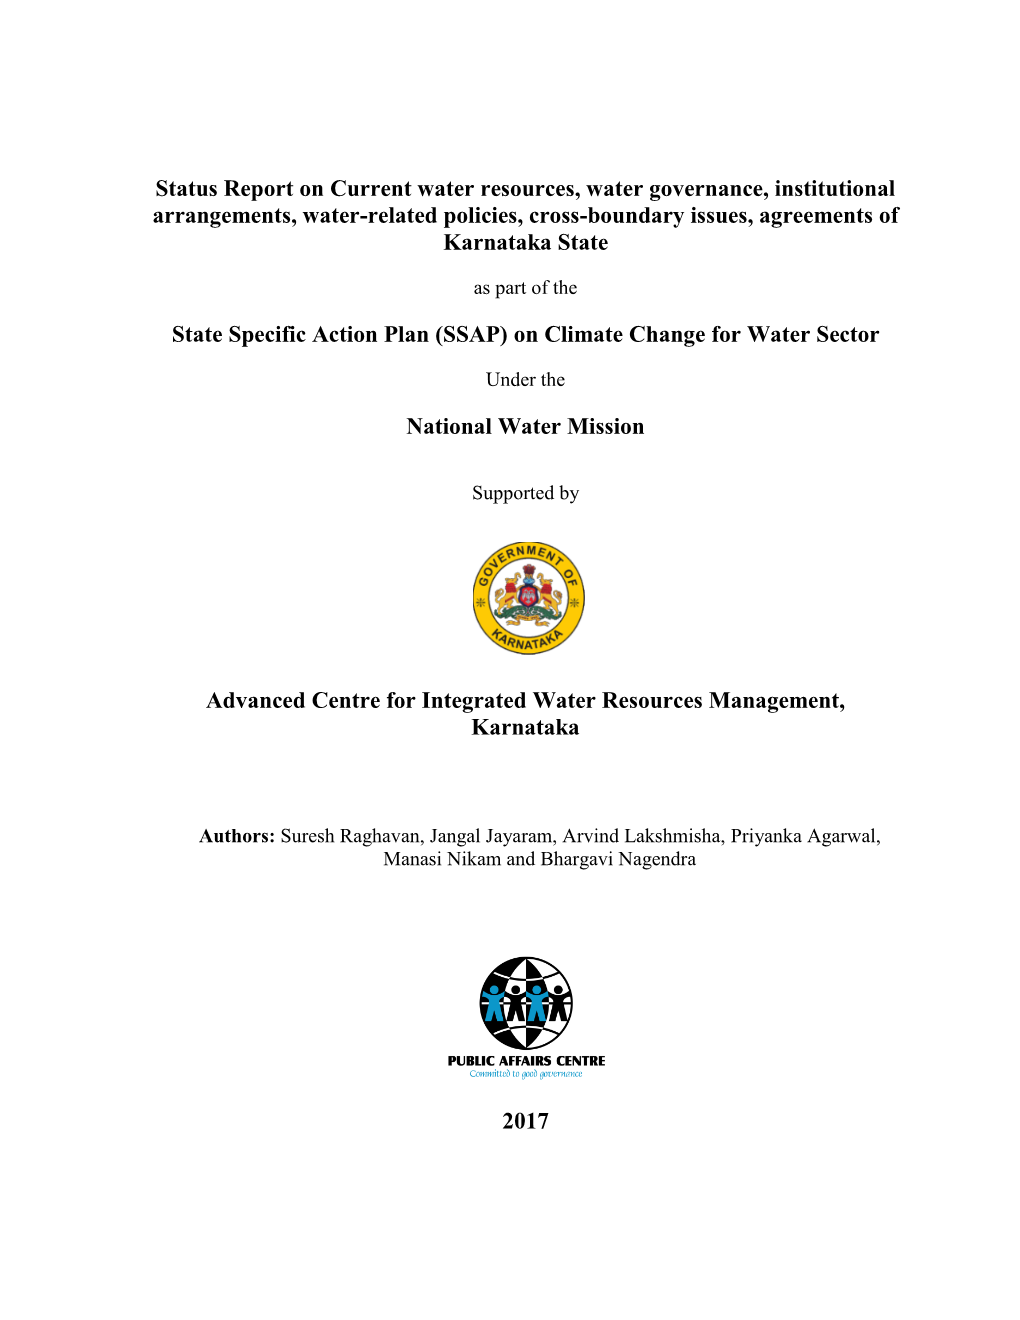 Status Report on Current Water Resources, Water Governance, Institutional Arrangements, Water-Related Policies, Cross-Boundary Issues, Agreements of Karnataka State